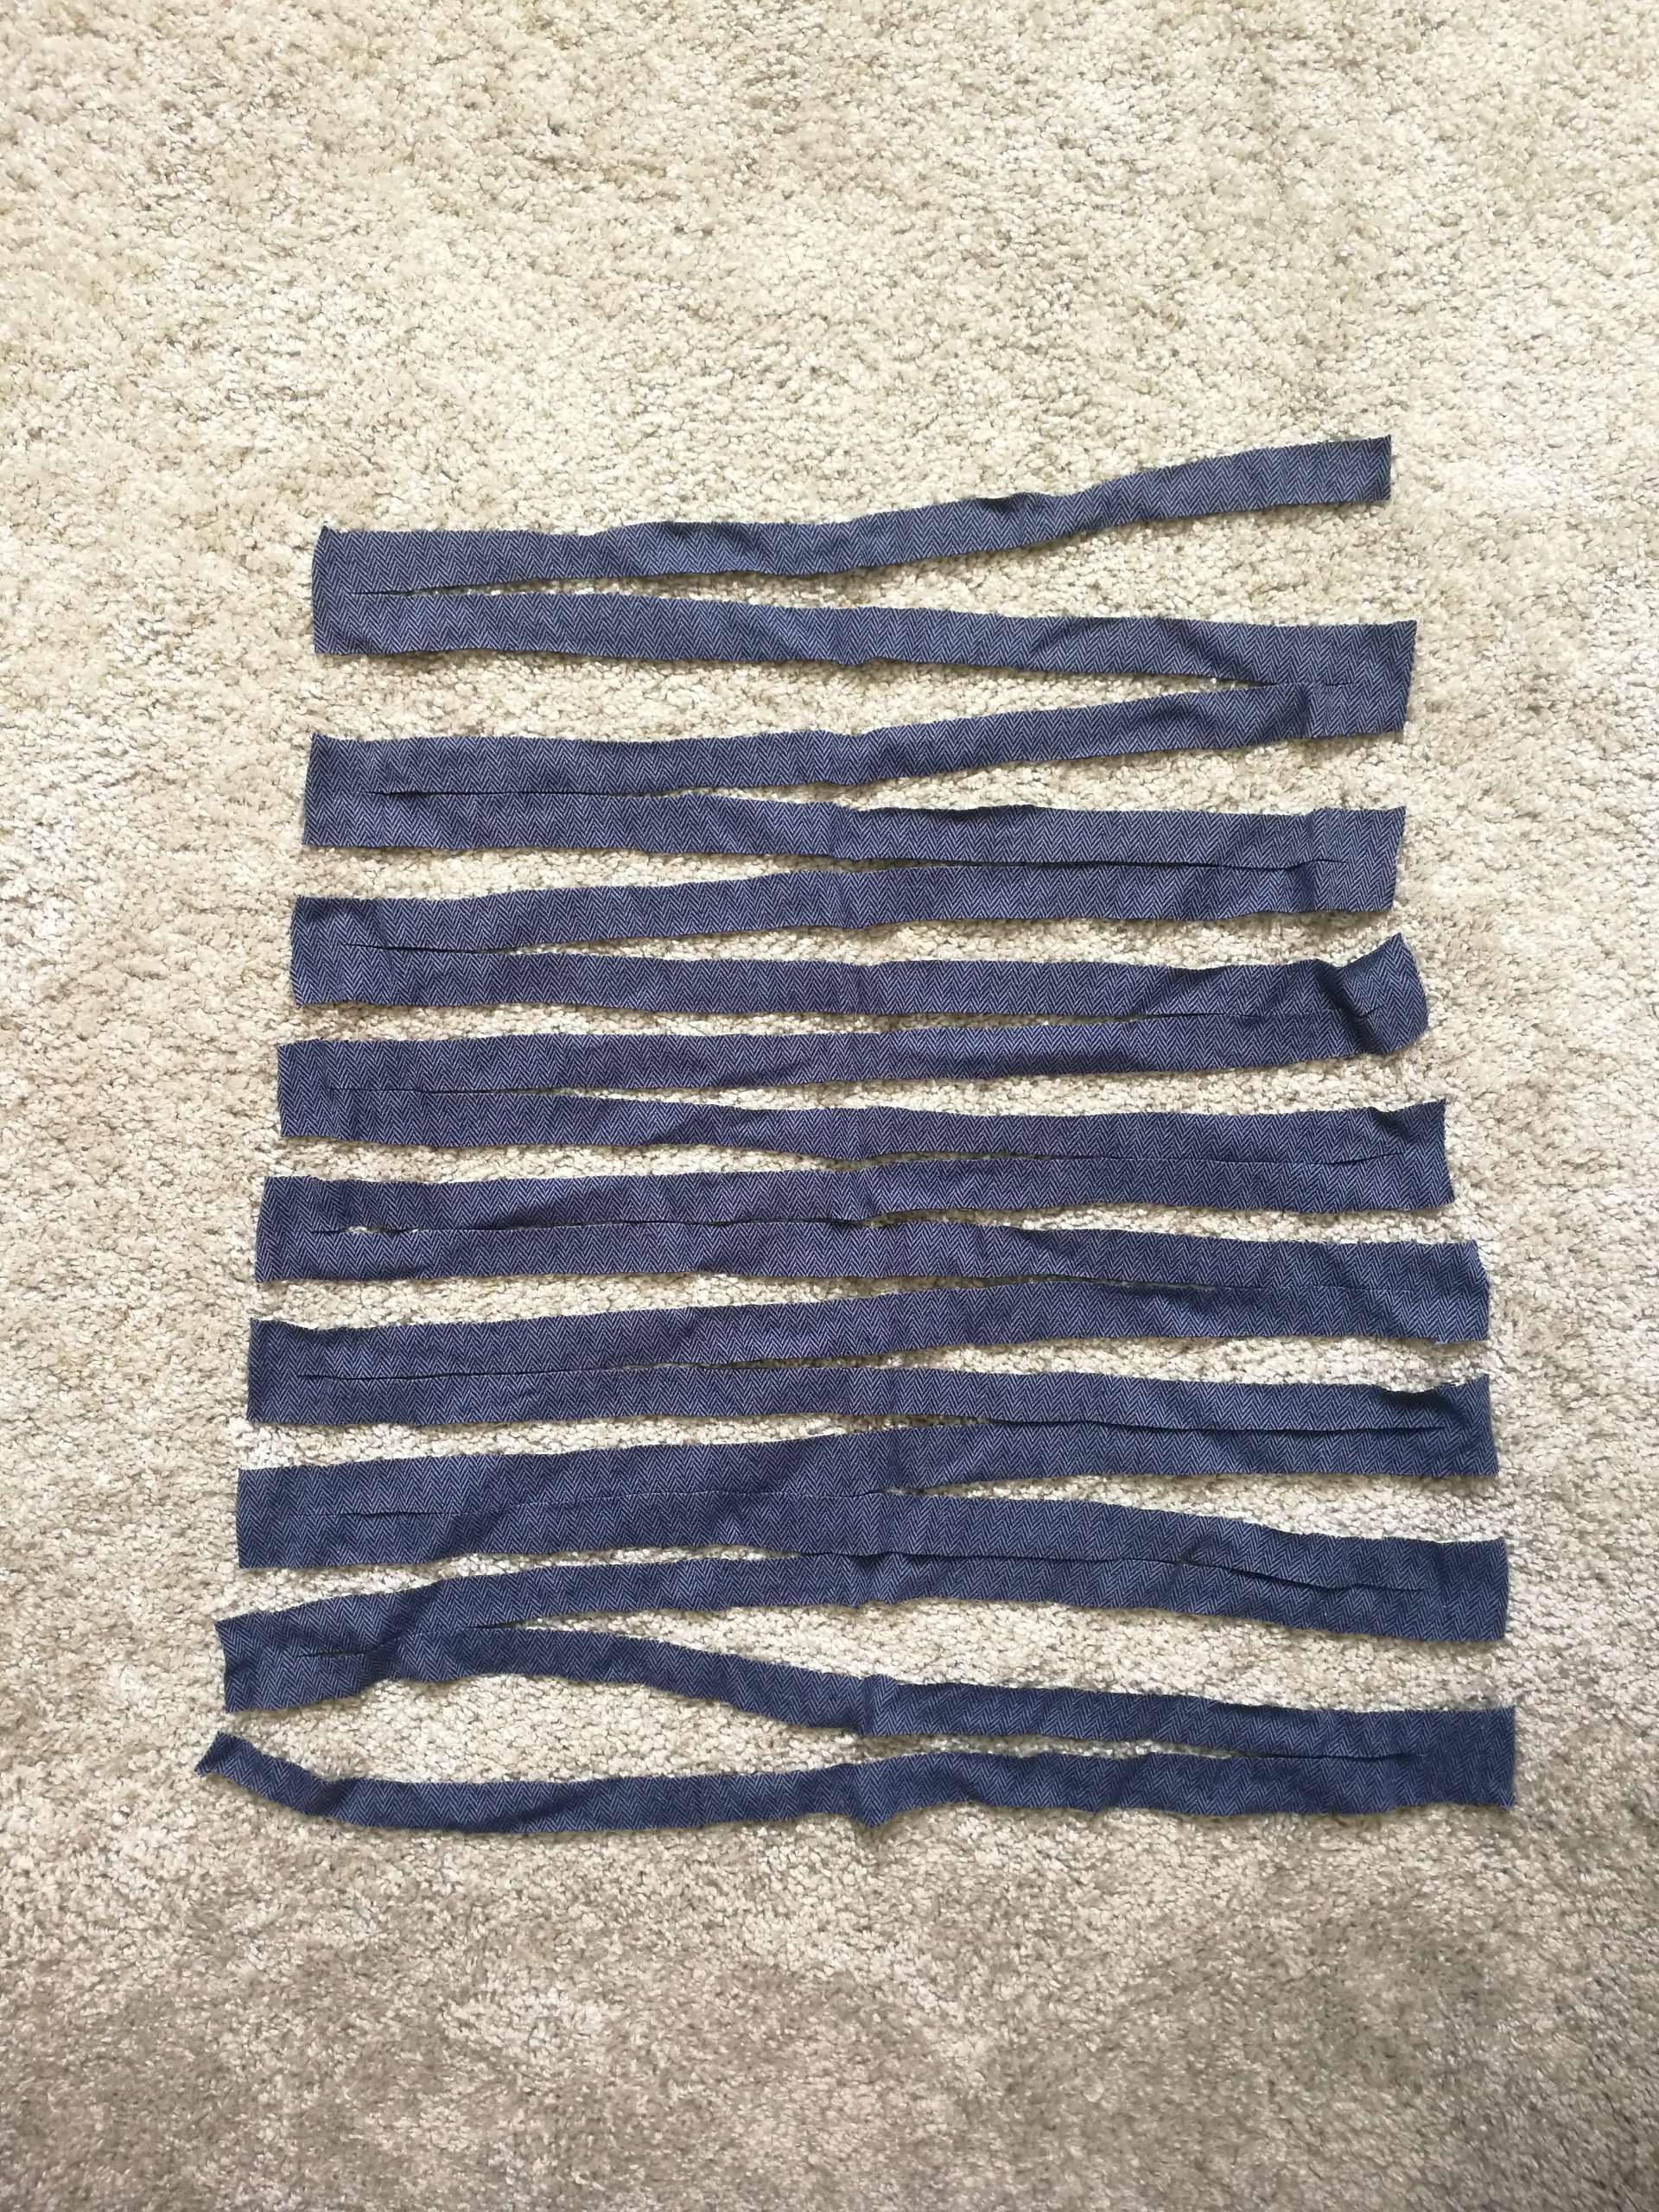 yarn from old shirt